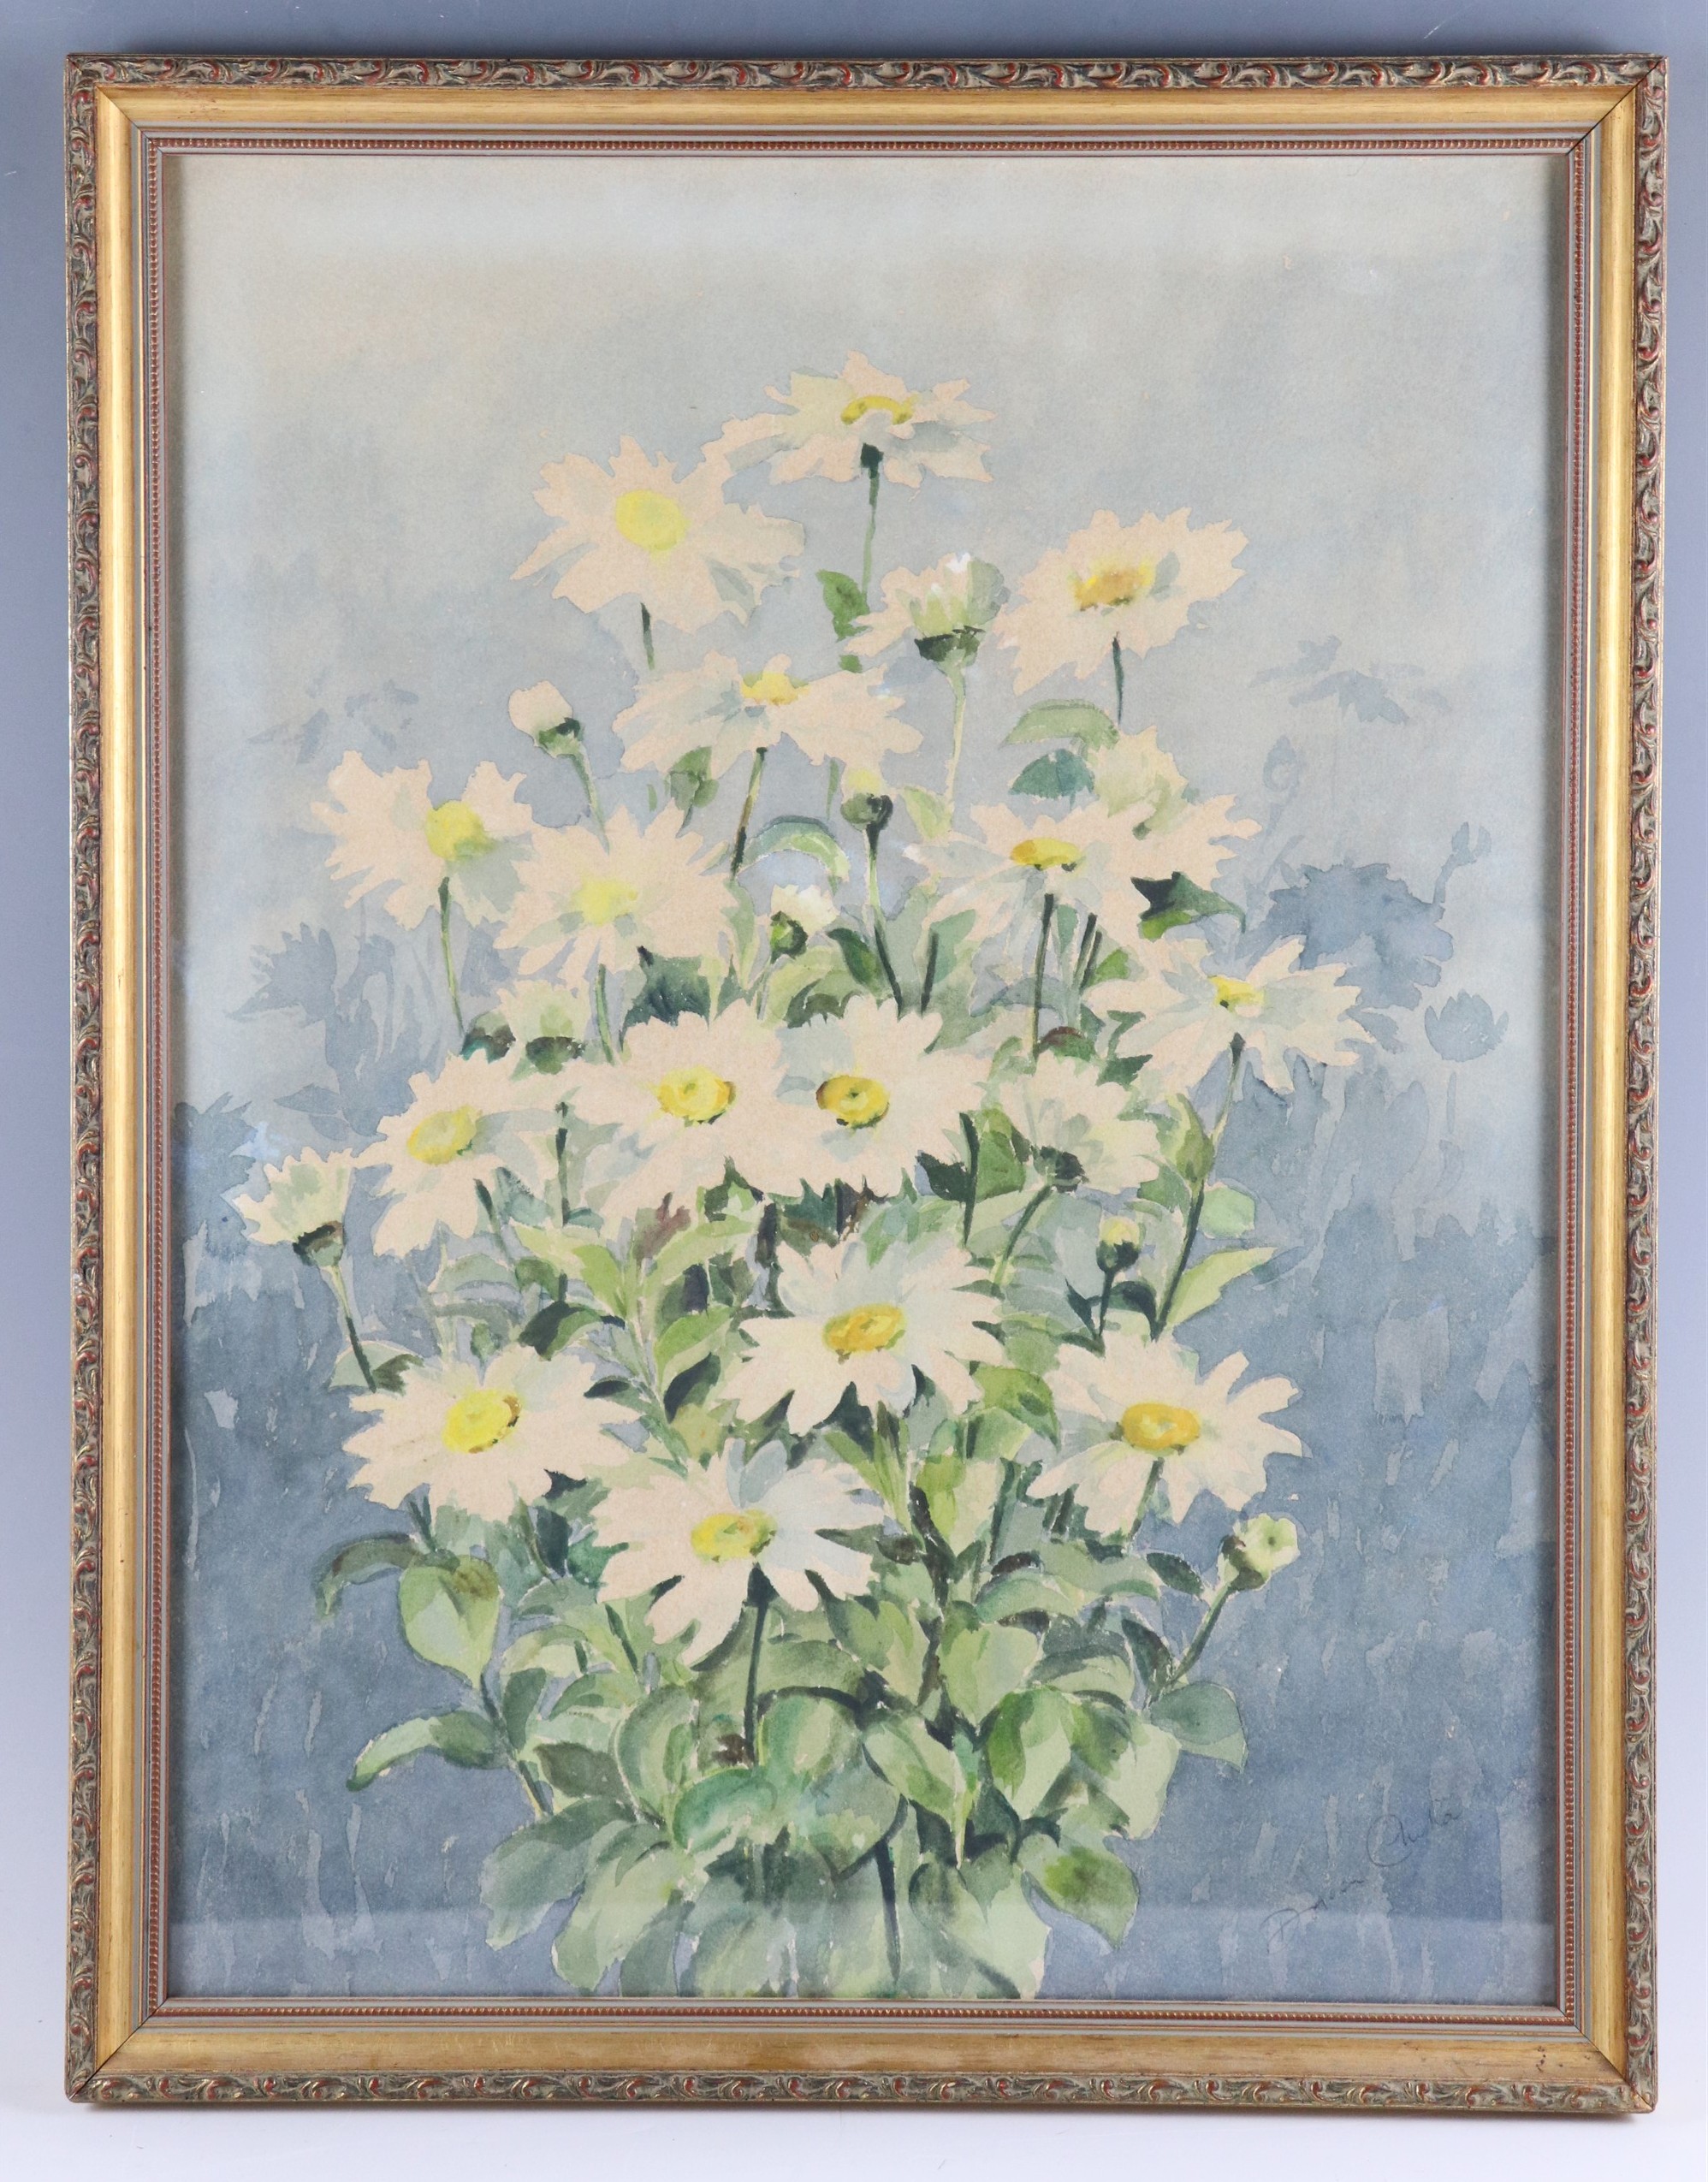 Doreen Chiha (Welsh, Contemporary) A still life of a bunch of daisies set against blue, watercolour, - Image 2 of 2